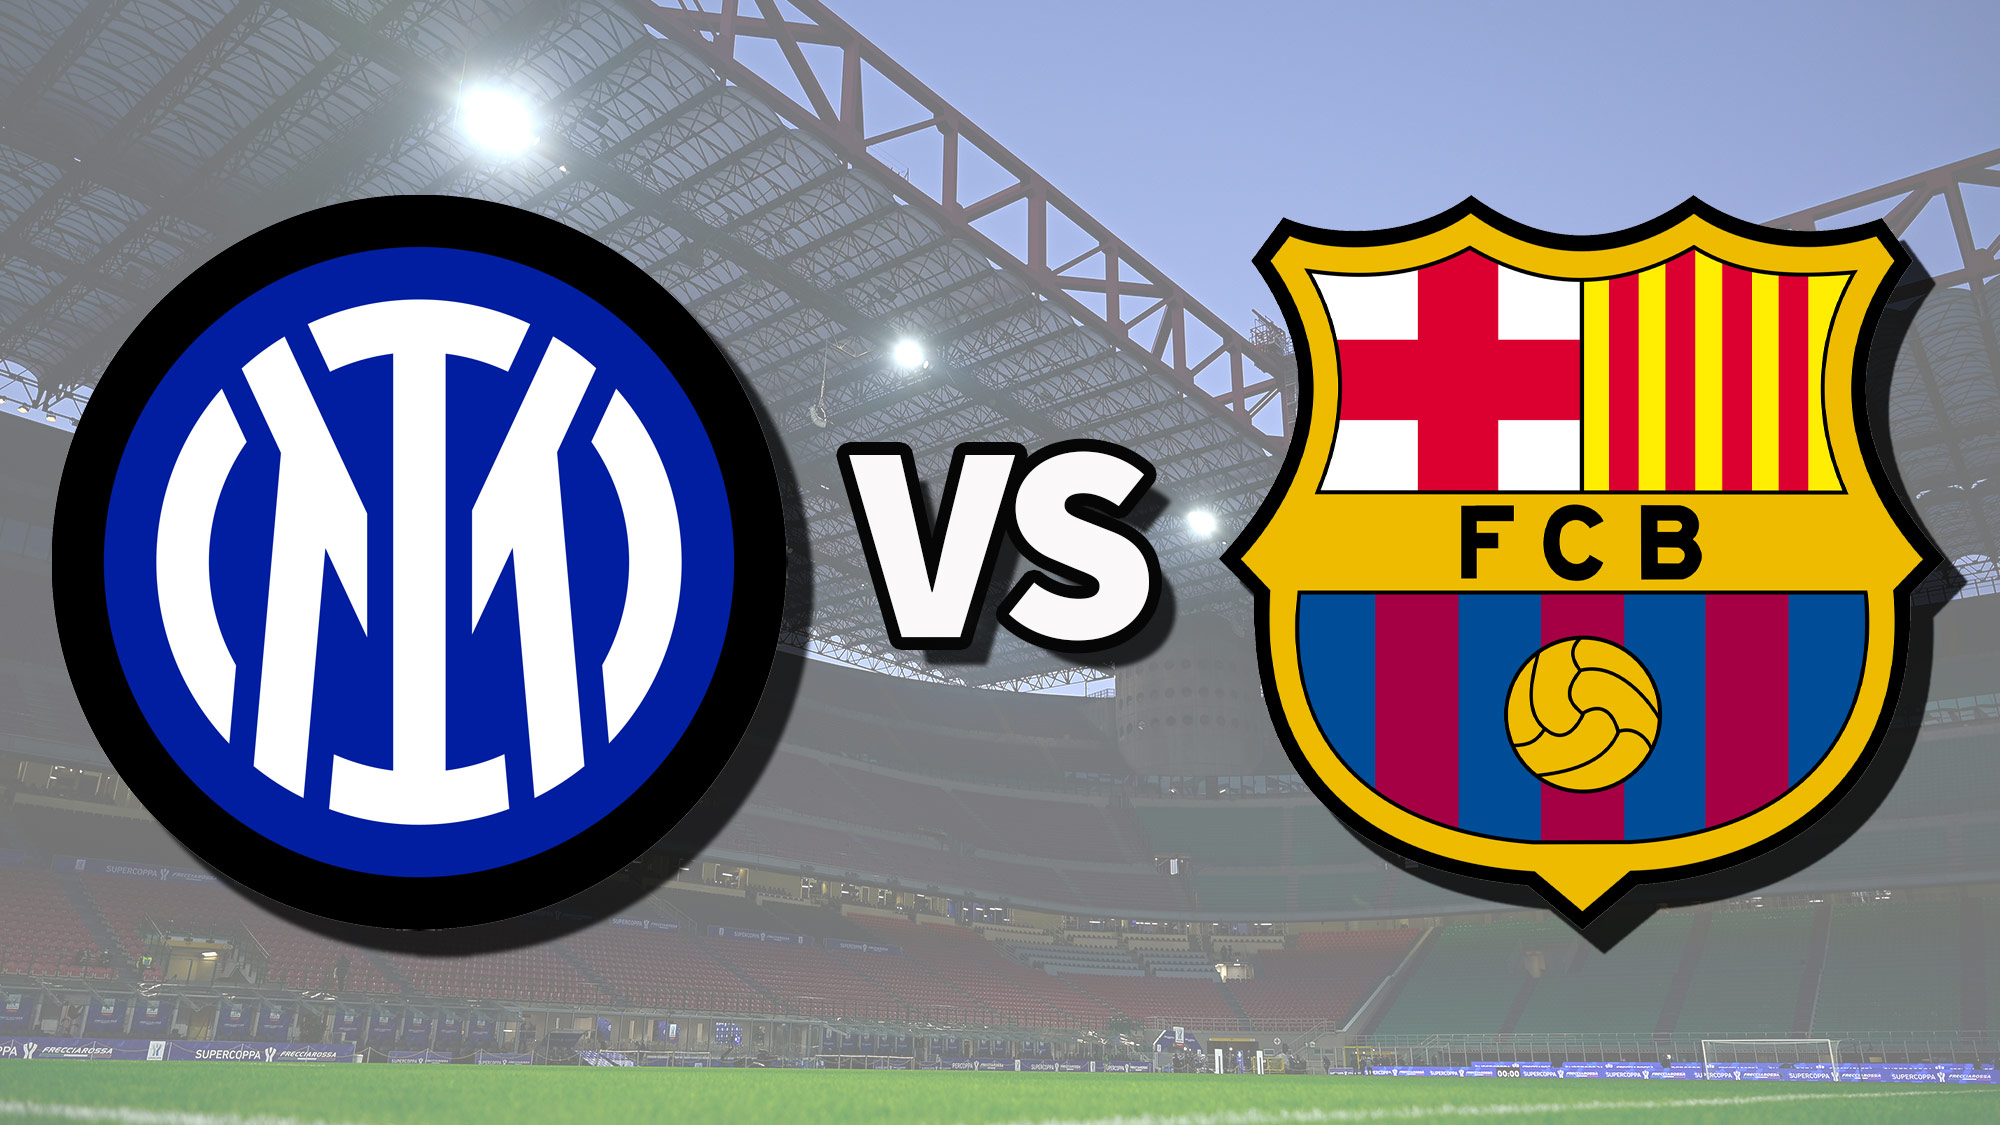 Inter Milan vs Barcelona live stream How to watch Champions League